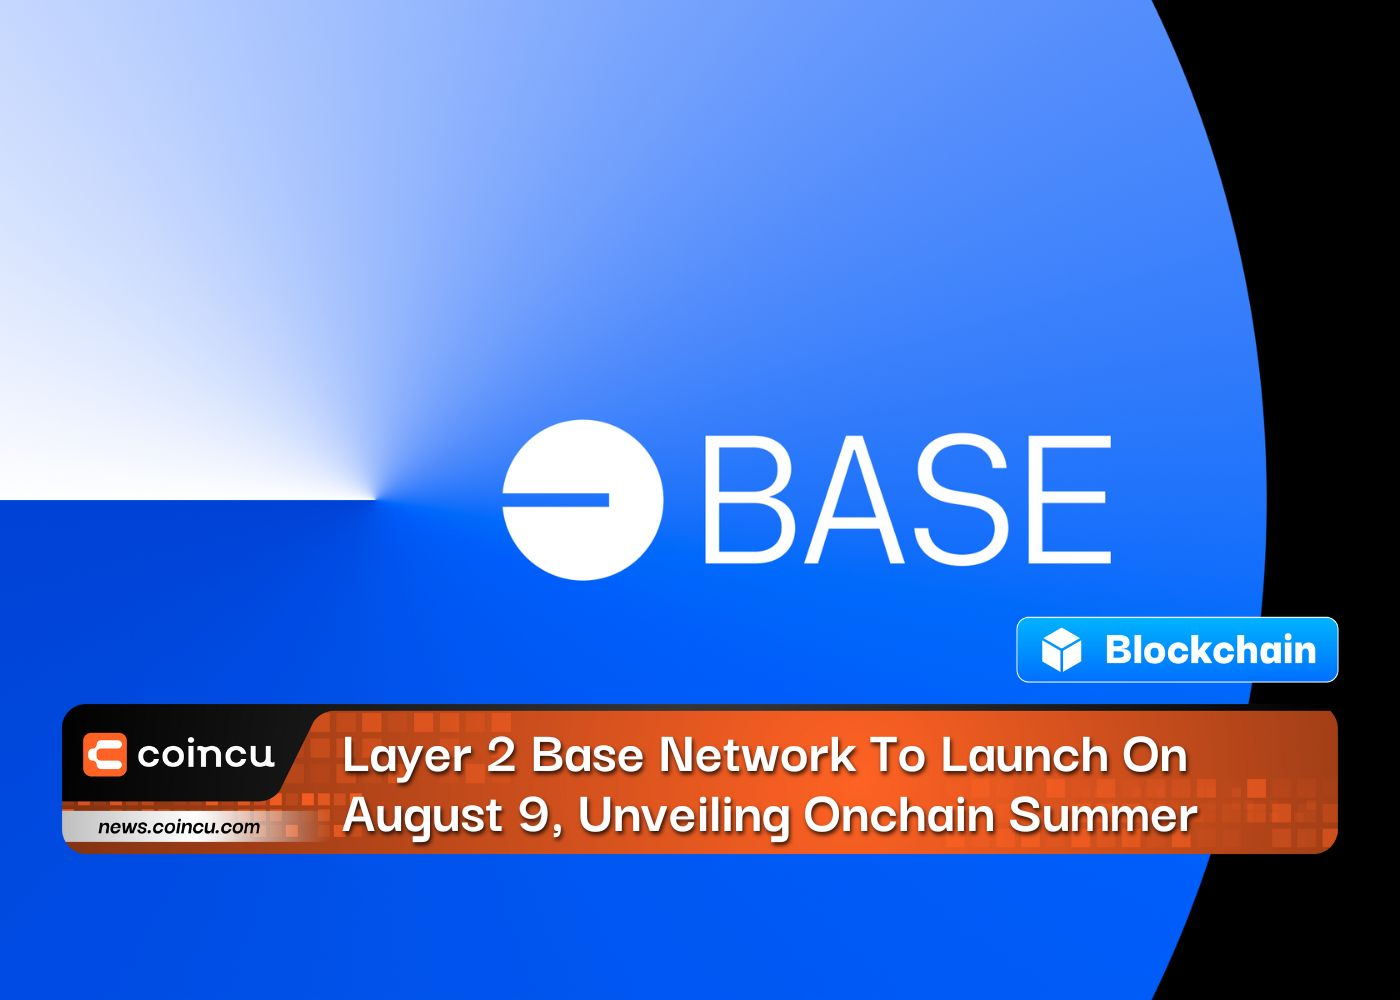 Layer 2 Base Network To Launch On August 9, Unveiling Onchain Summer